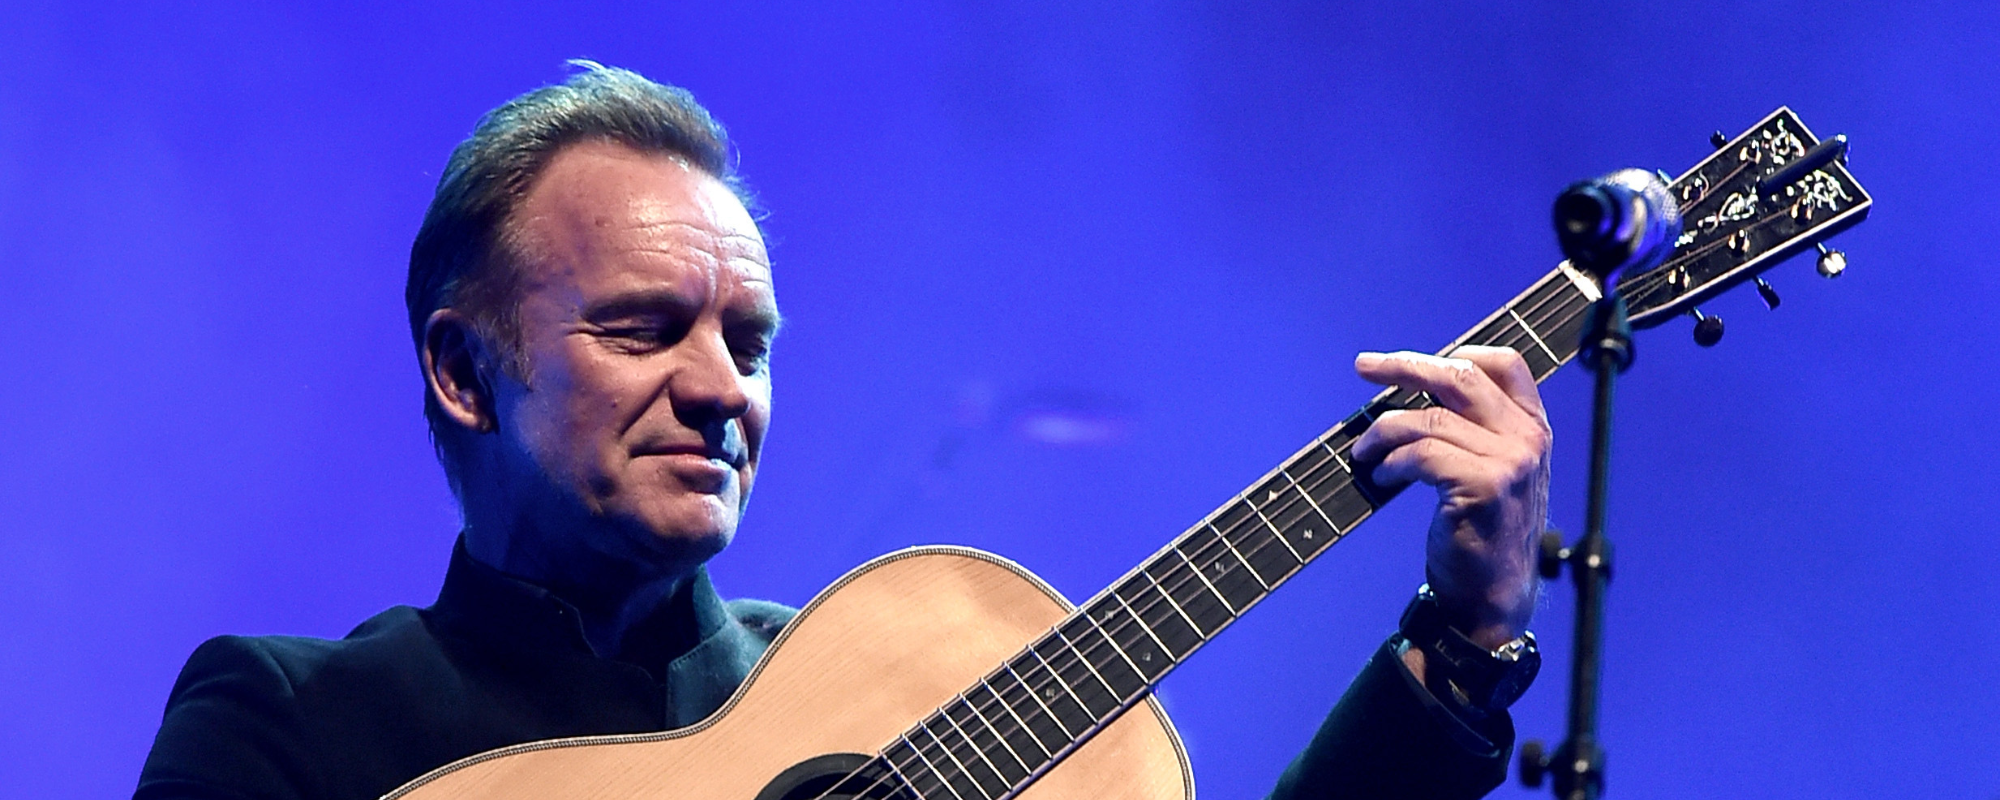 King of Sting: The 5 Finest Solo Moments from The Police’s Former Frontman